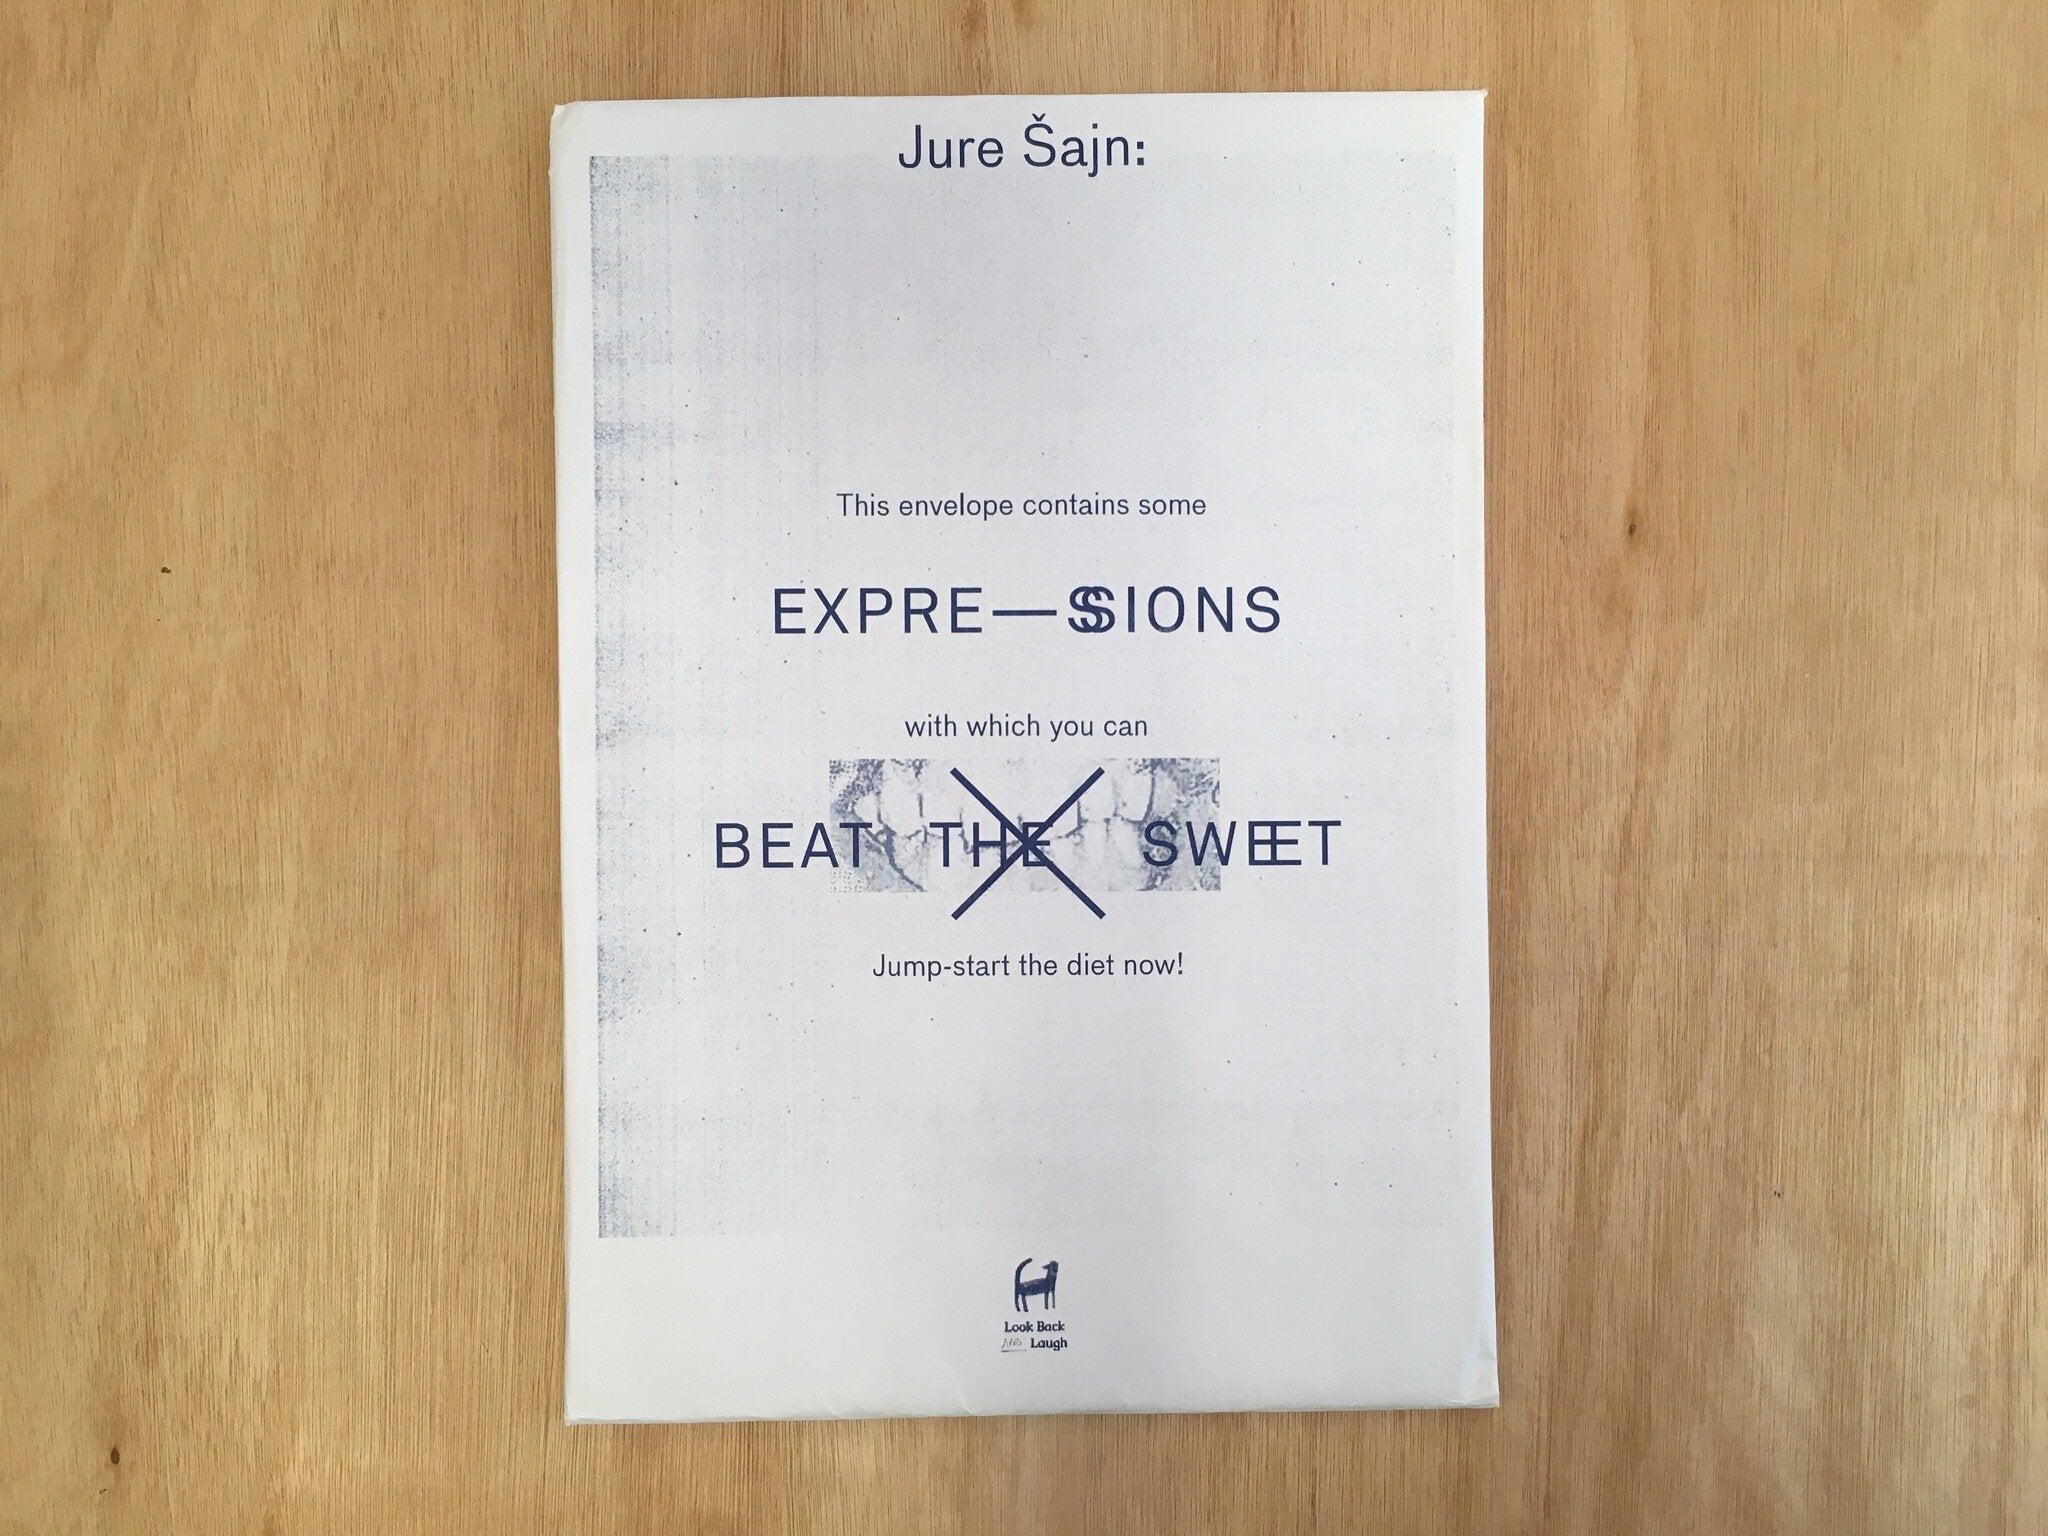 EXPRESSIONS / BEAT THE SWEET by Jure Šajn